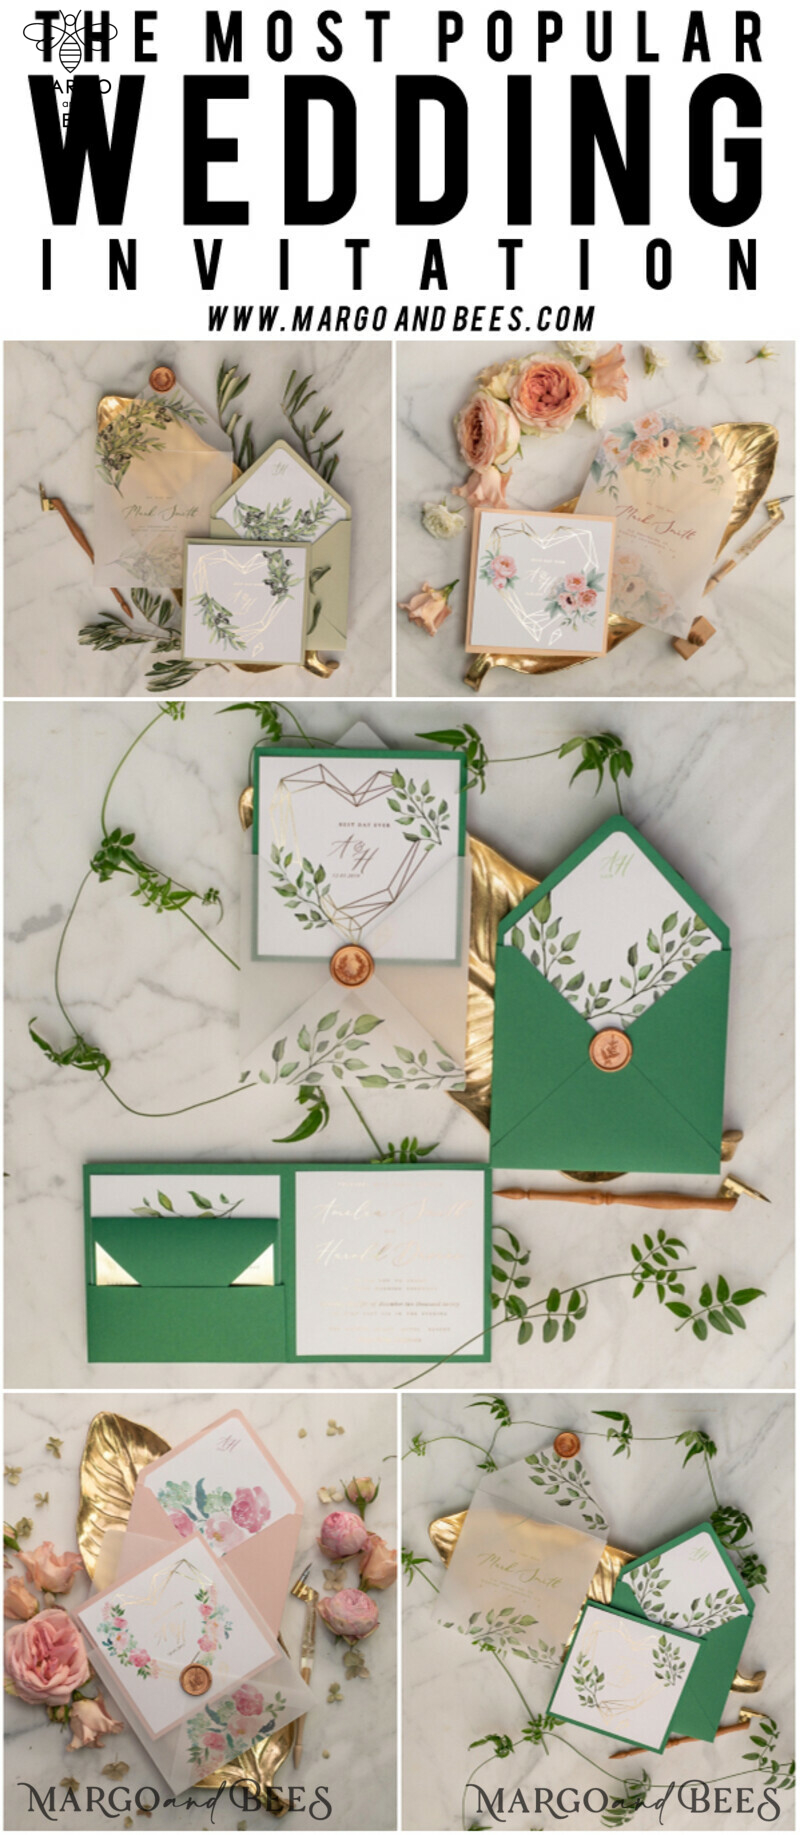 Luxury Gold Foil Wedding Invitations: Elegant Pocketfold Cards with Glamour Greenery and Geometric Vellum Suite-9